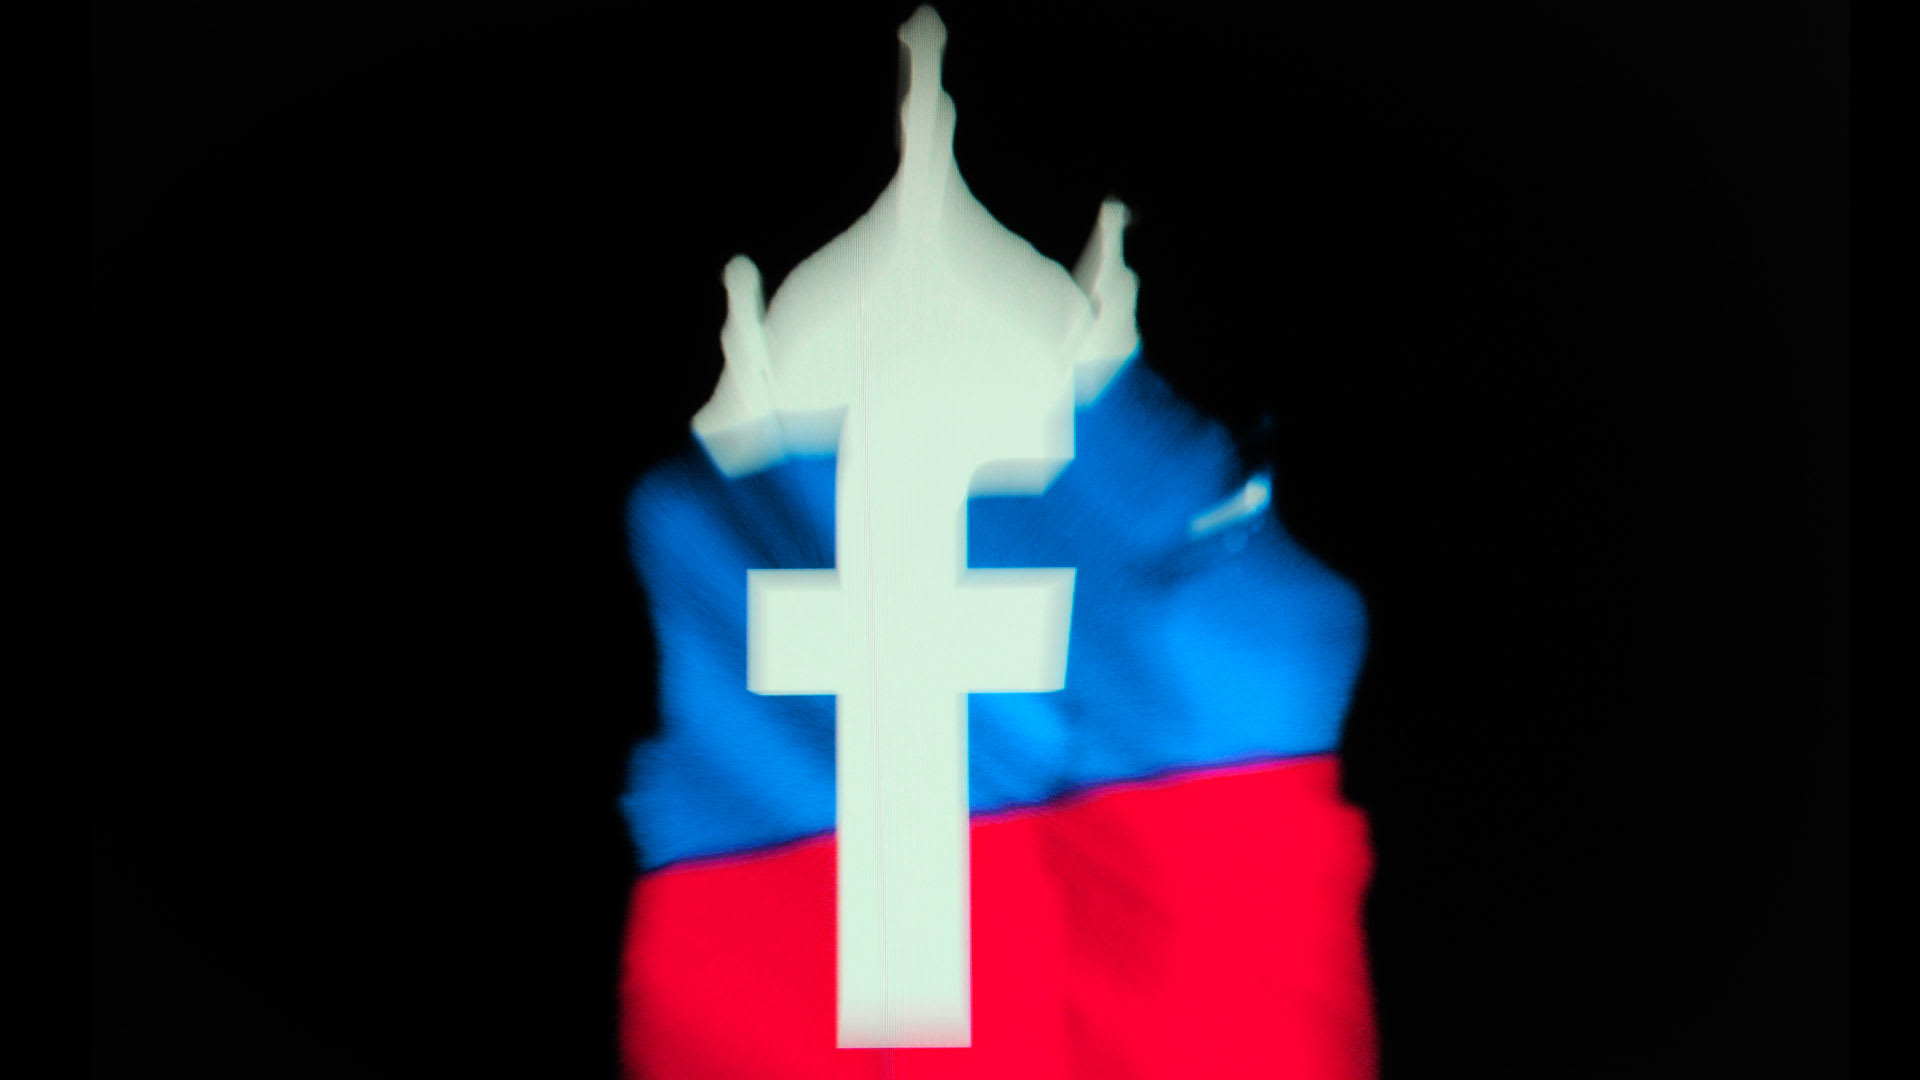 Under pressure, Facebook agrees to give users some disclosure on Russian content